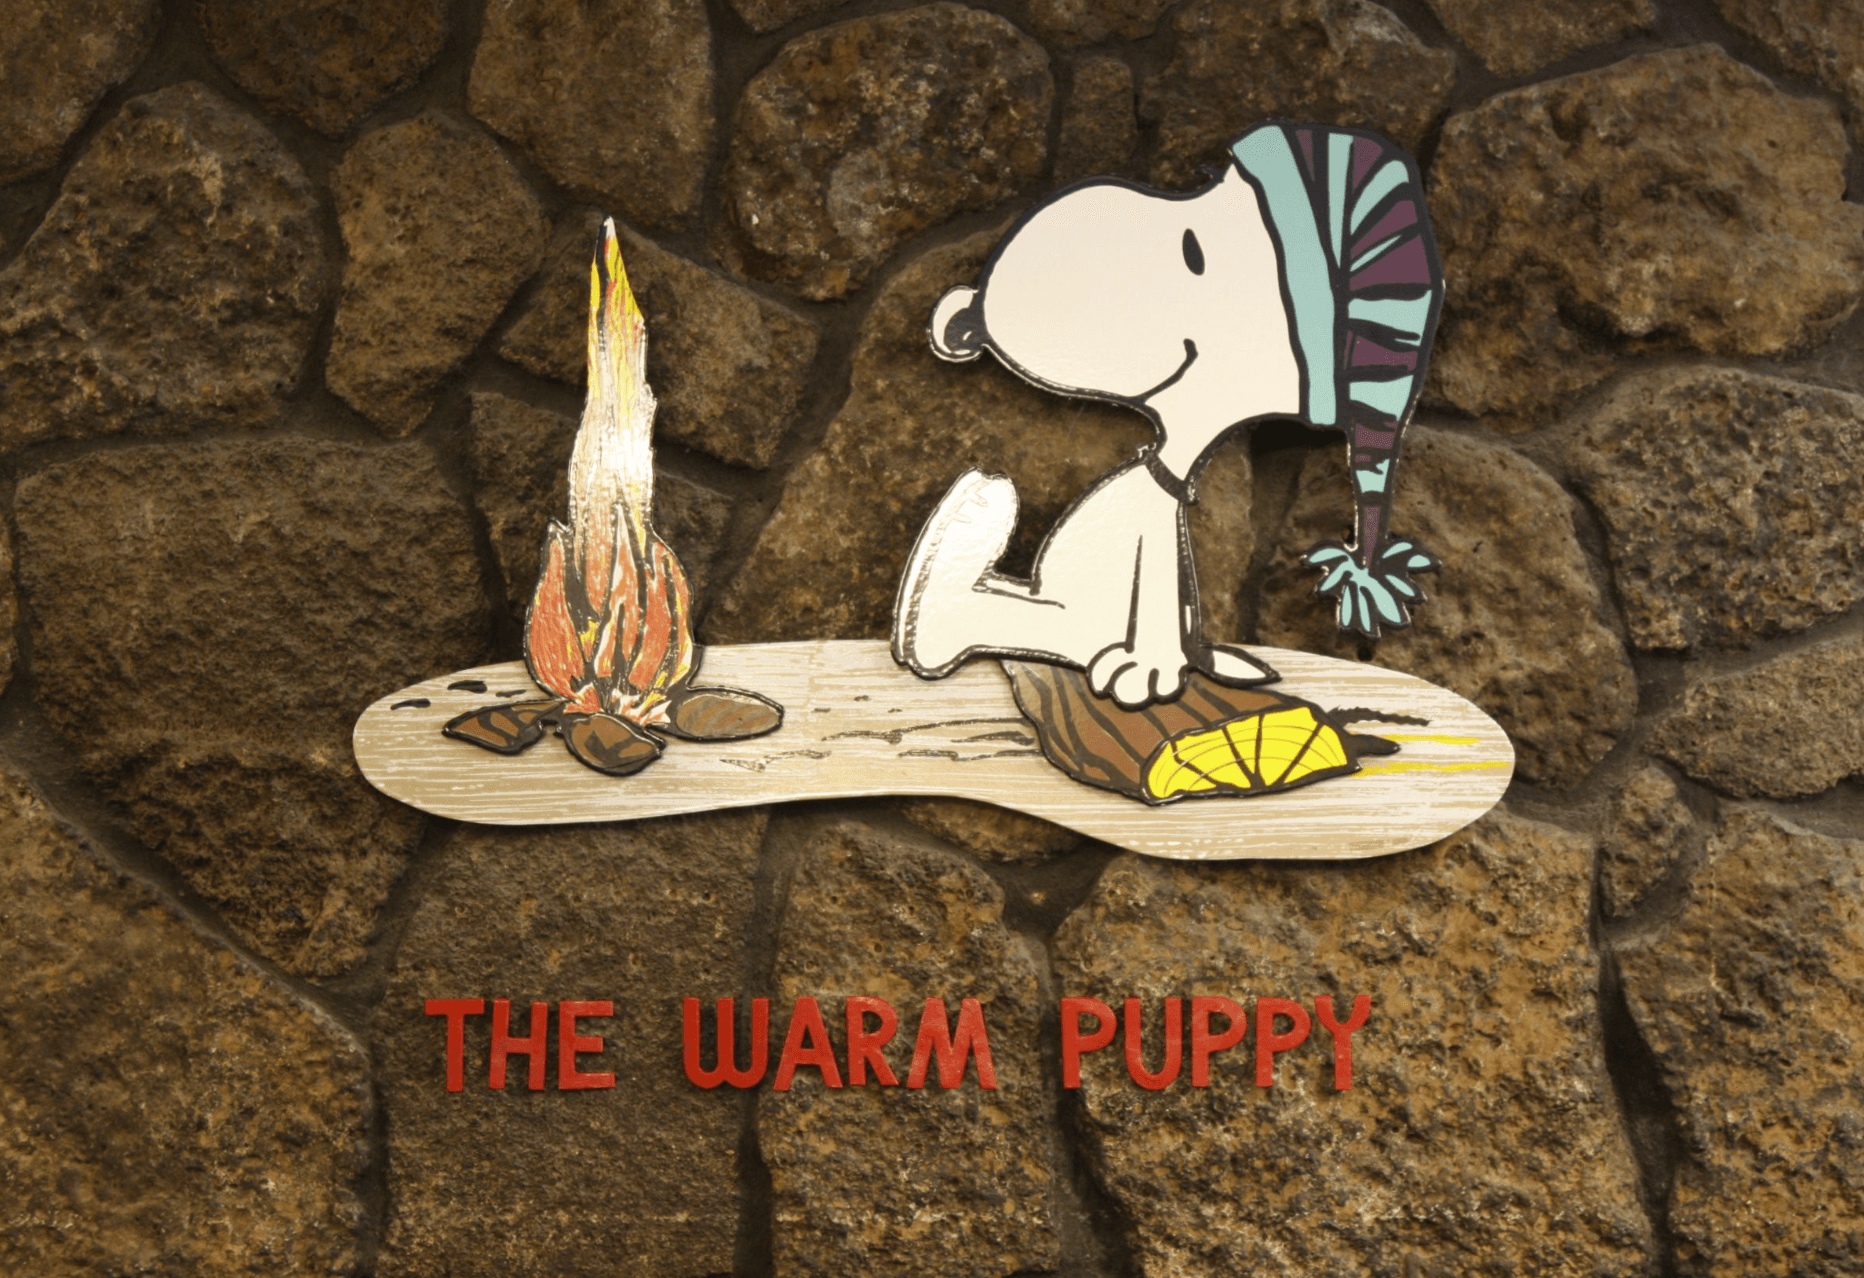 The Peanuts Cartoon character Snoopy is shown wearing a stocking hat and warming himself at a cozy campfire.